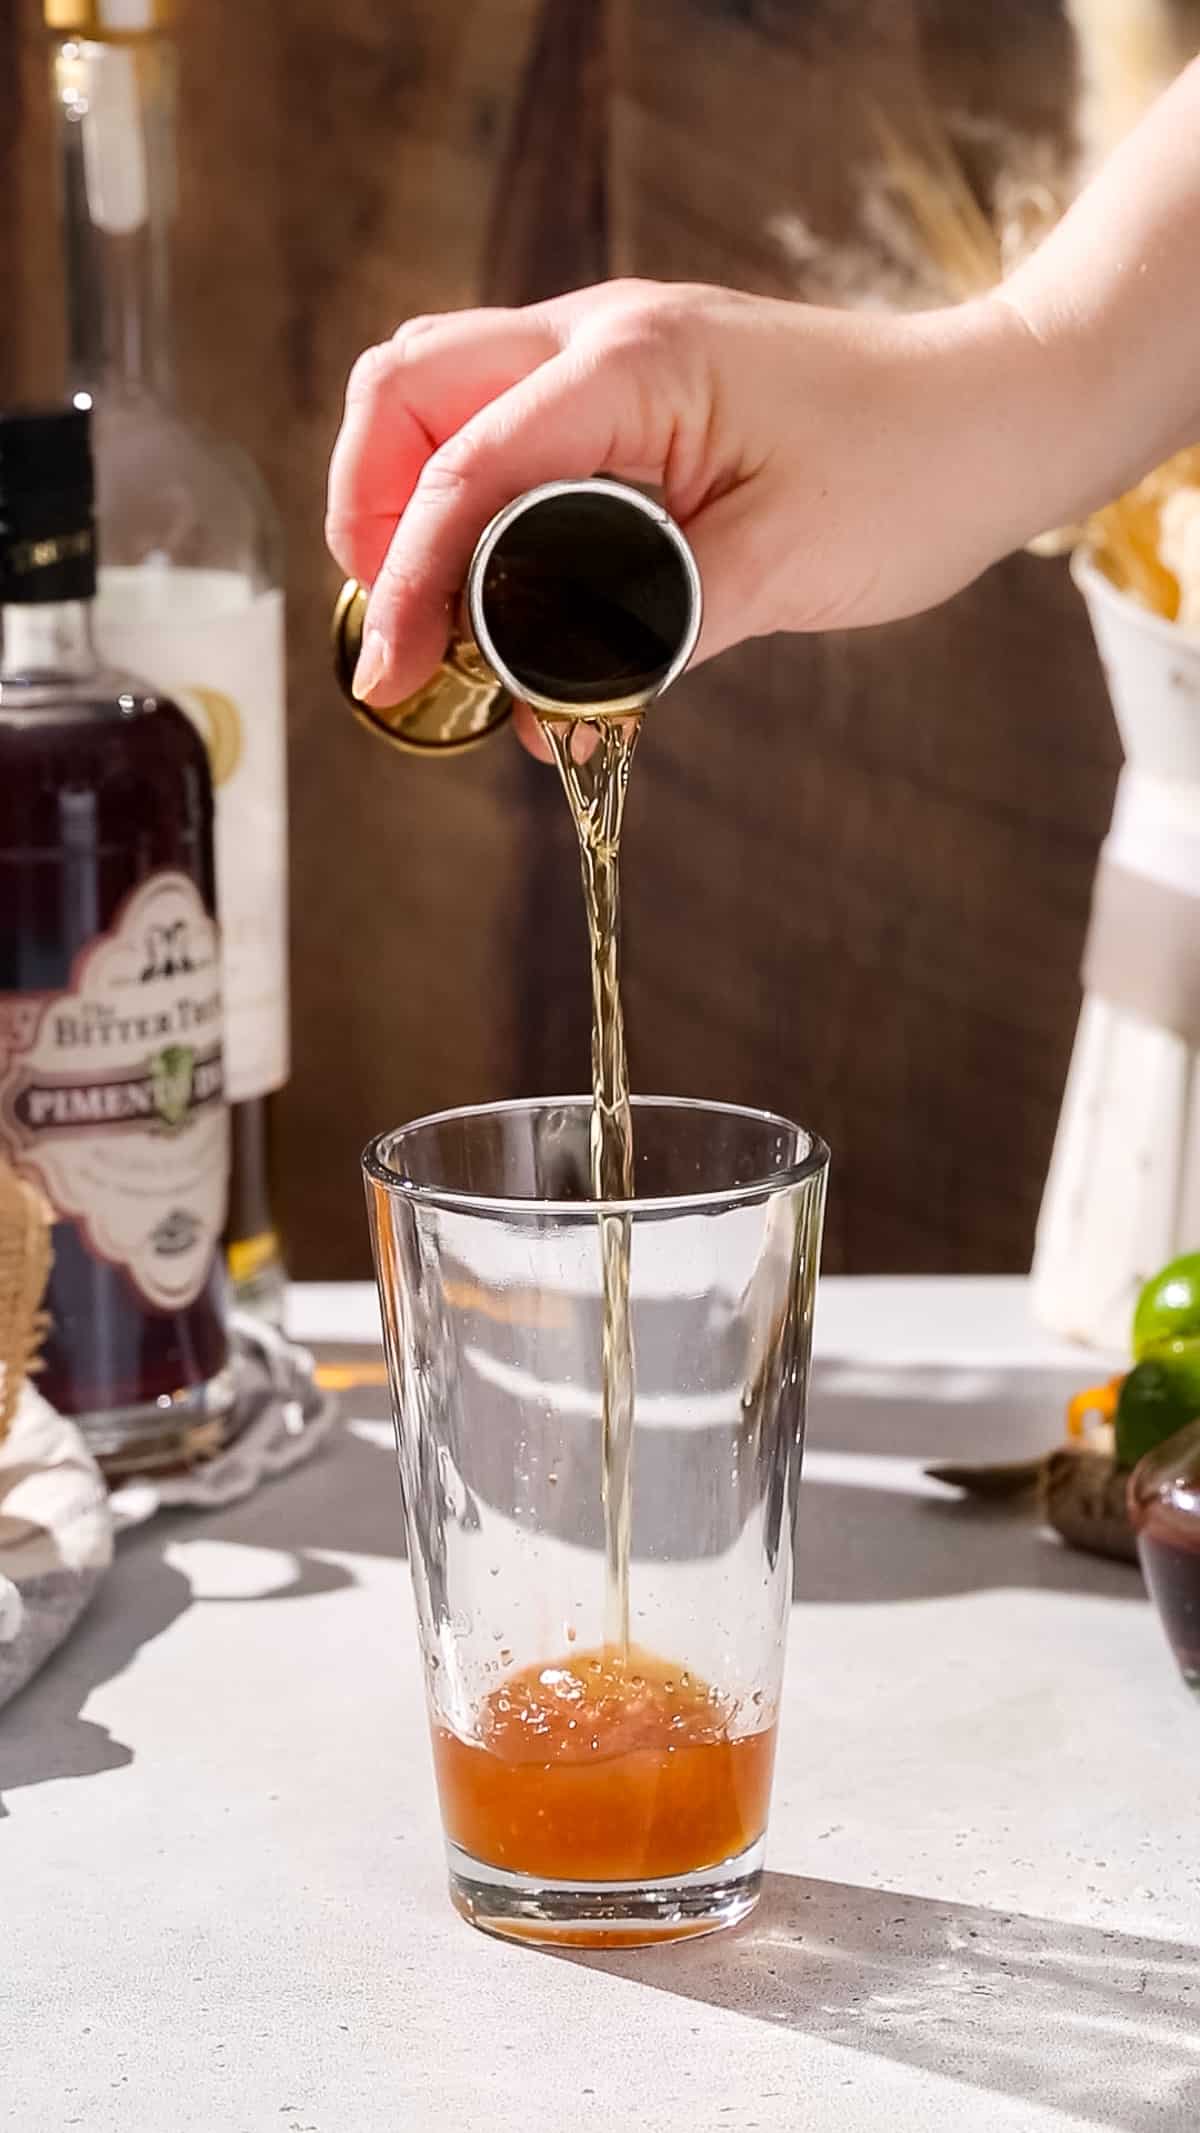 Hand adding bourbon to a cocktail shaker.